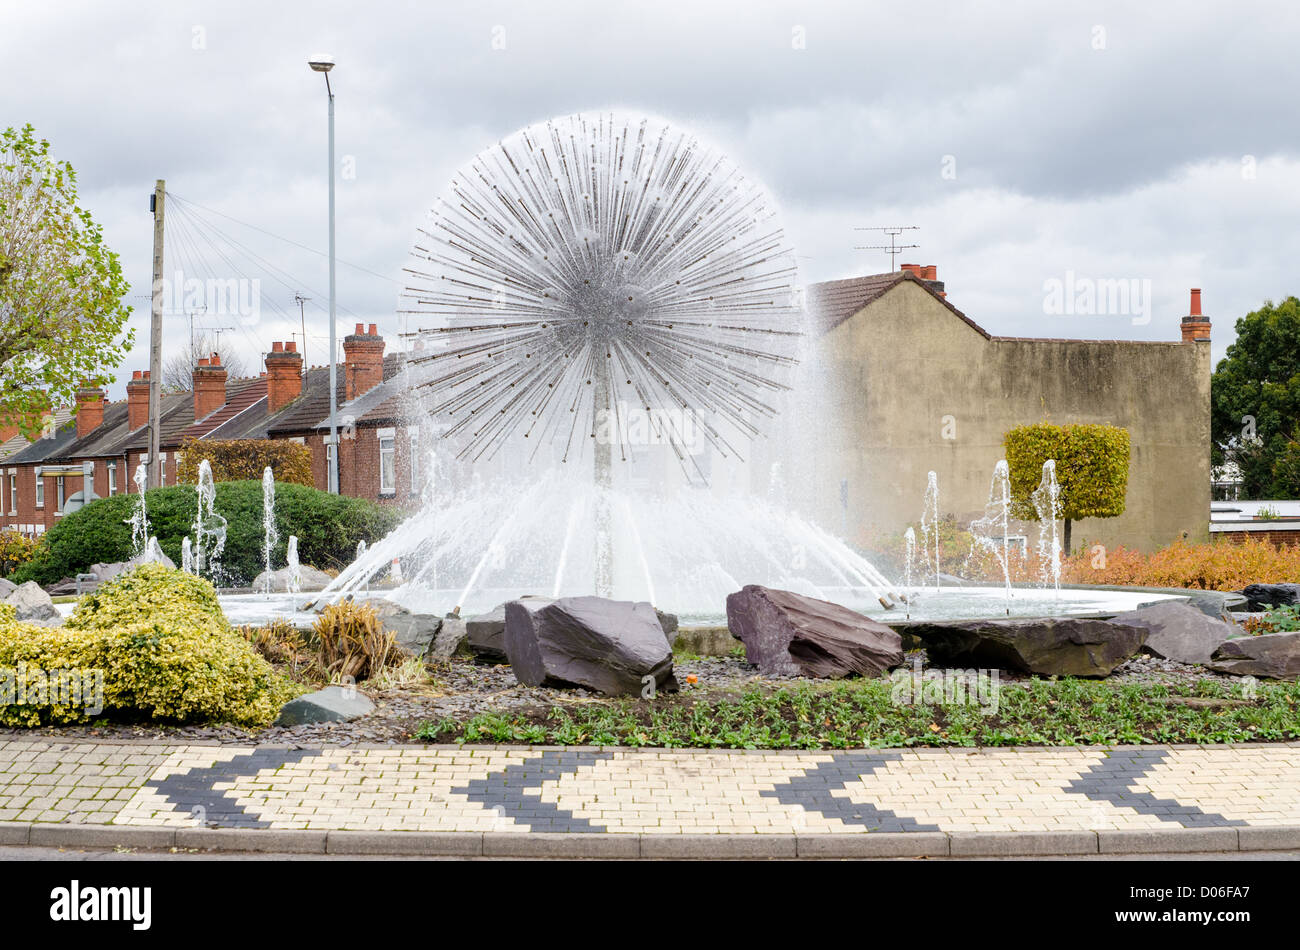 Roundabout in Nuneaton, Warwickshire with water feature Stock Photo